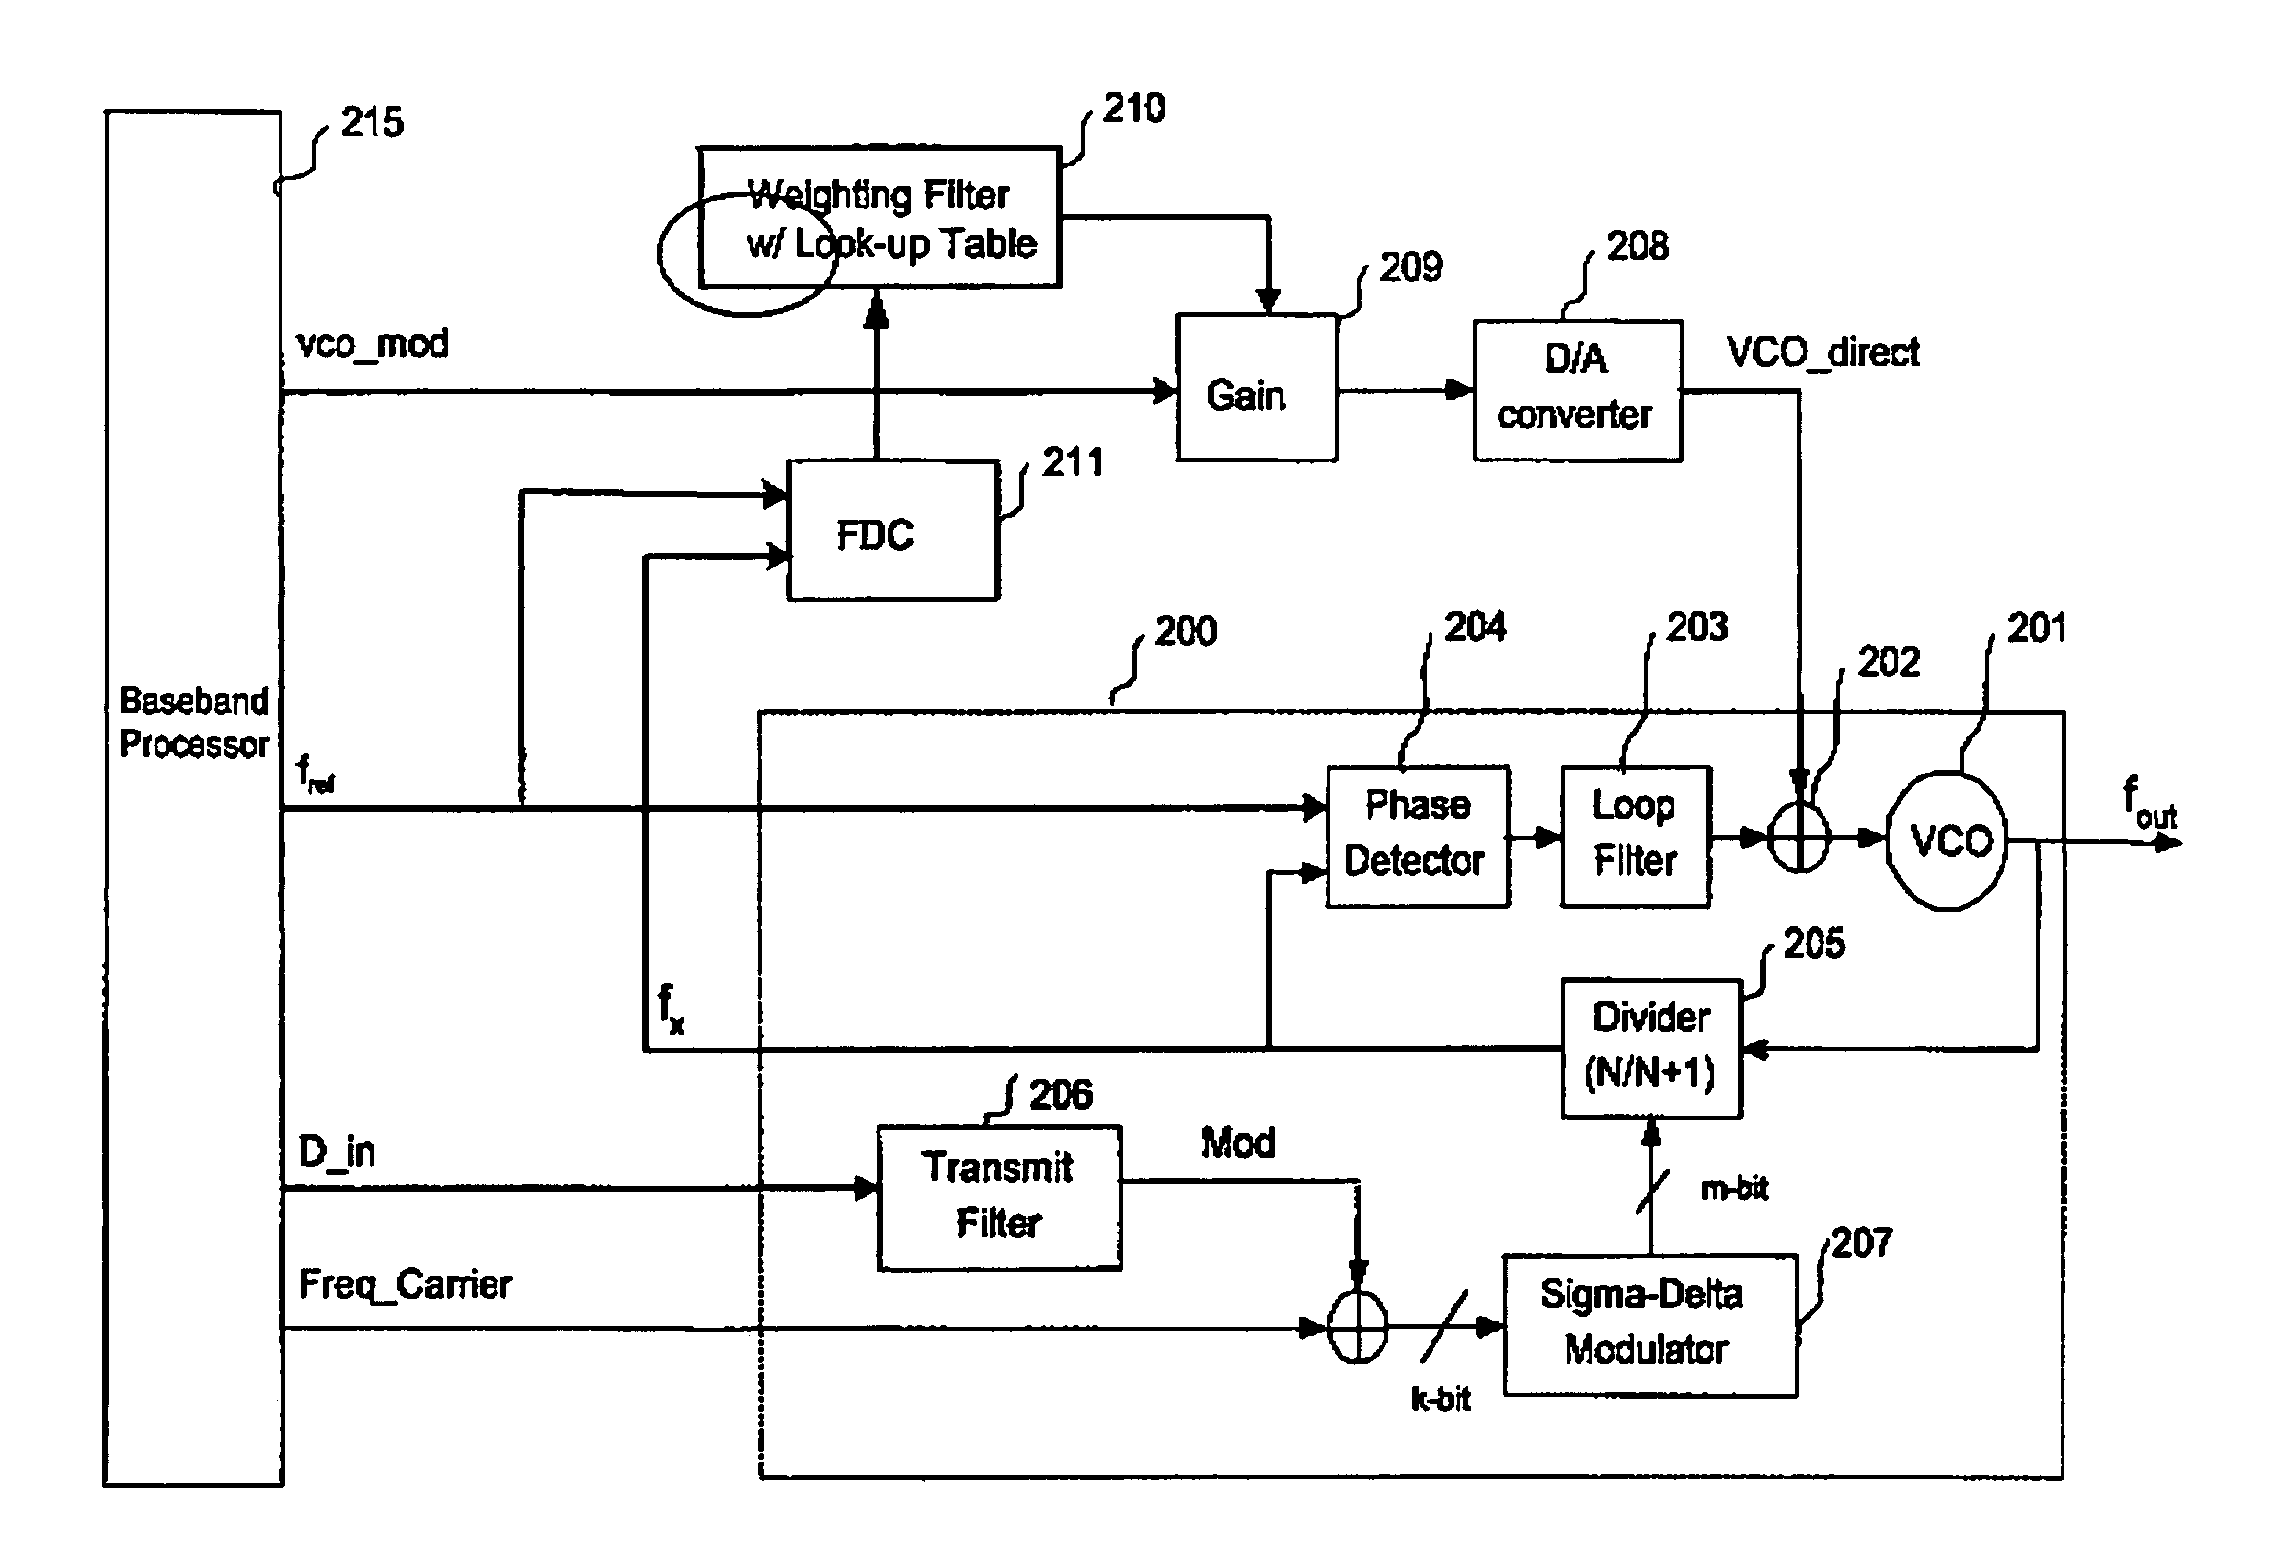 Direct modulation of a voltage-controlled oscillator (VCO) with adaptive gain control